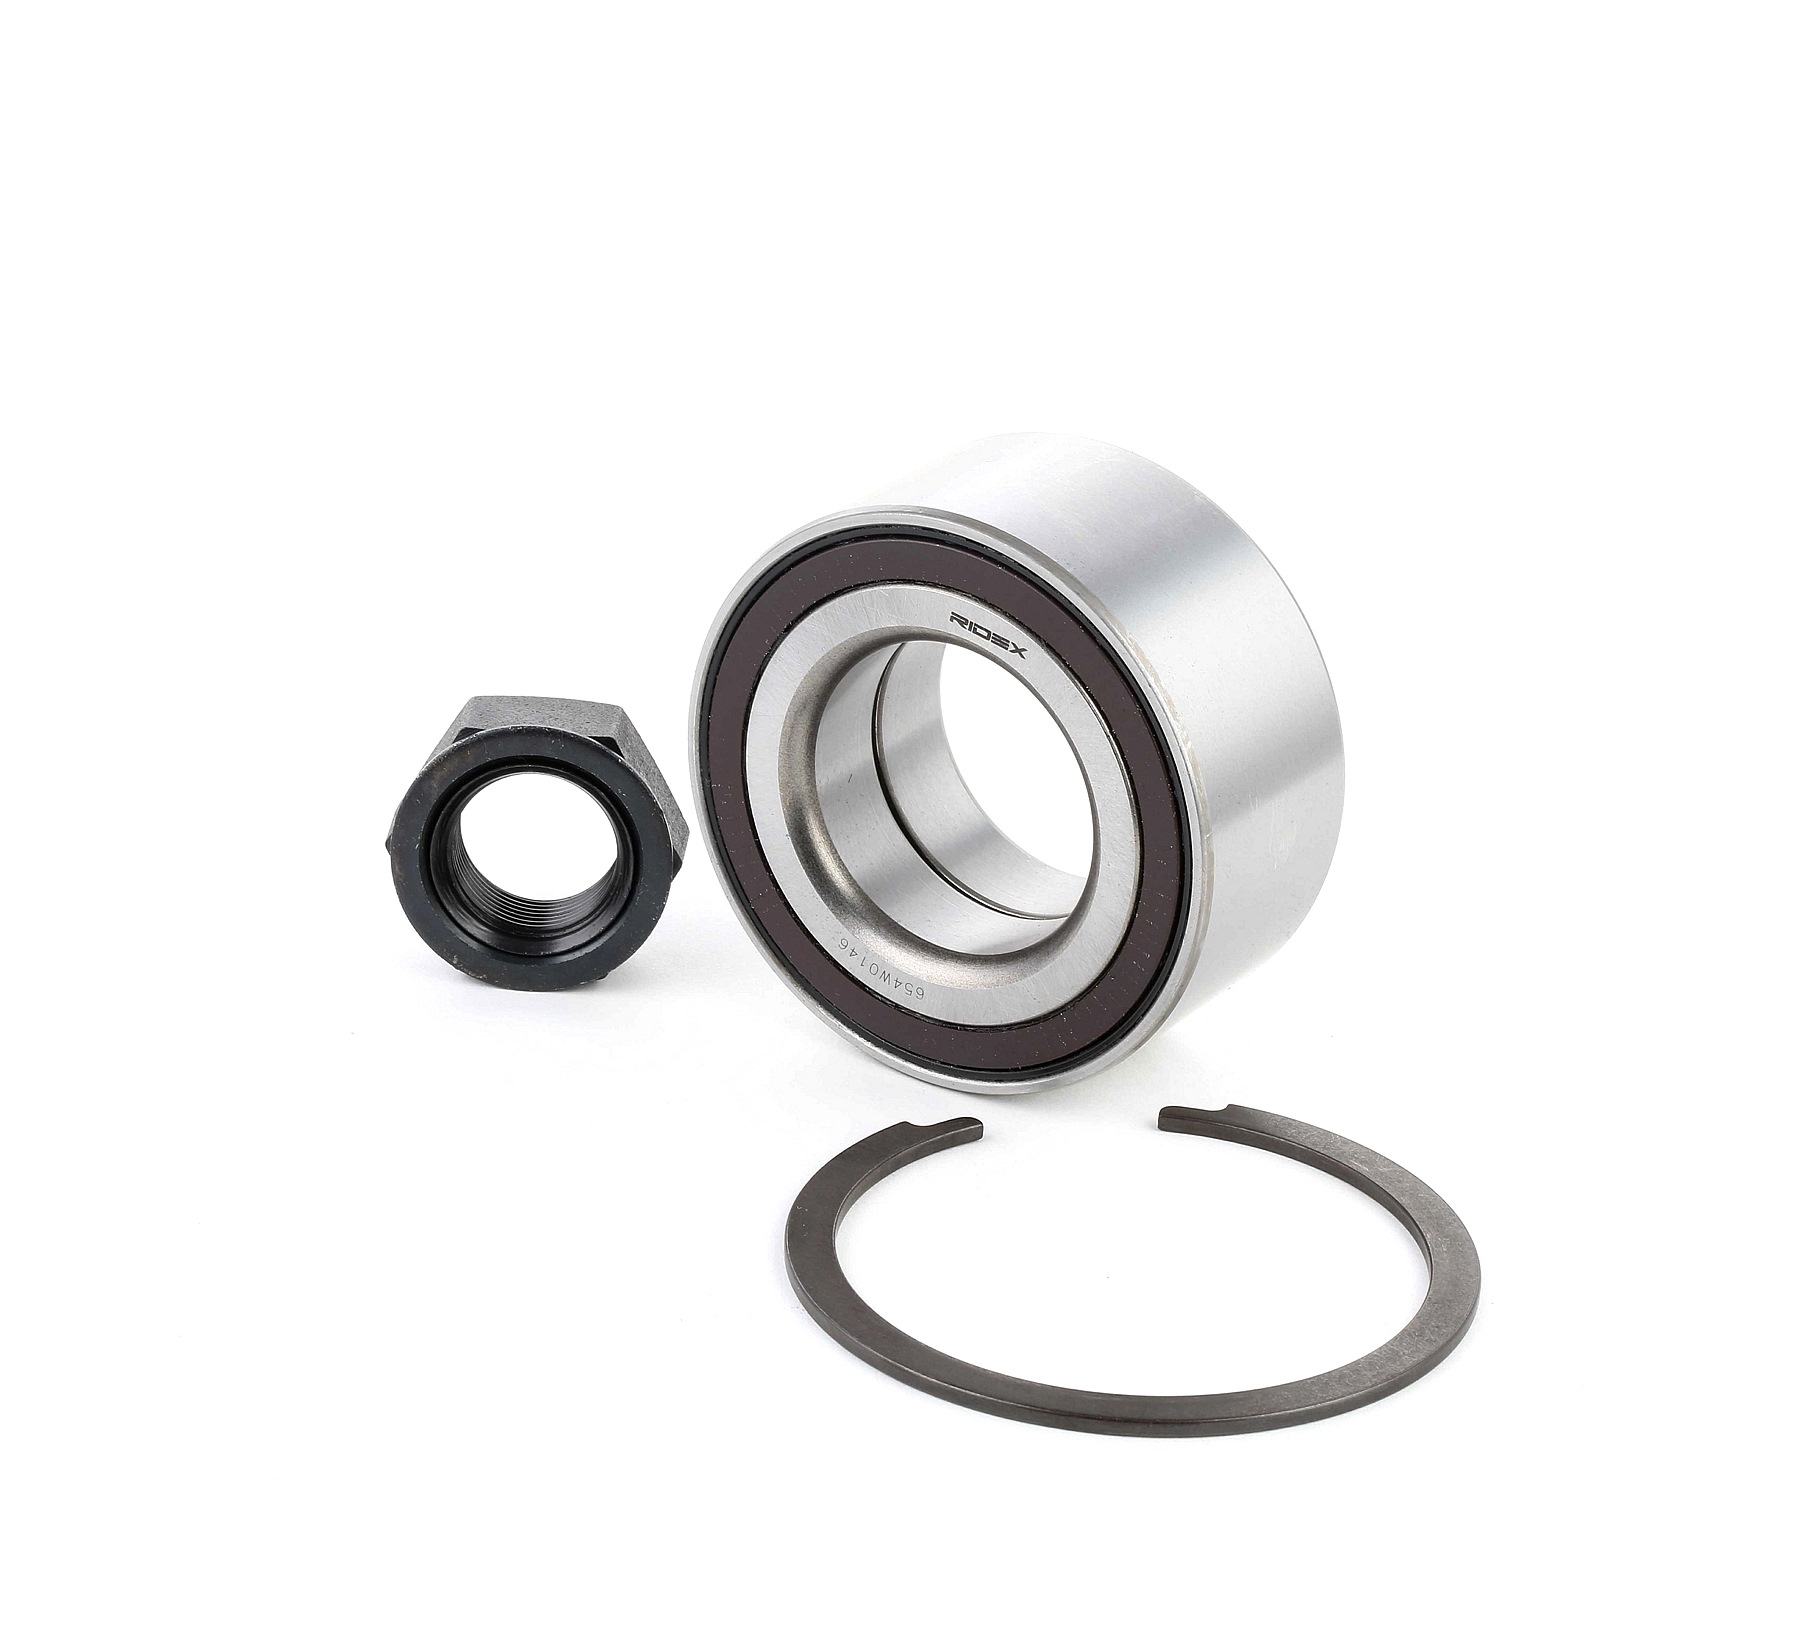 RIDEX 654W0146 original LANCIA Hub bearing Front axle both sides, with integrated magnetic sensor ring, 82,5 mm